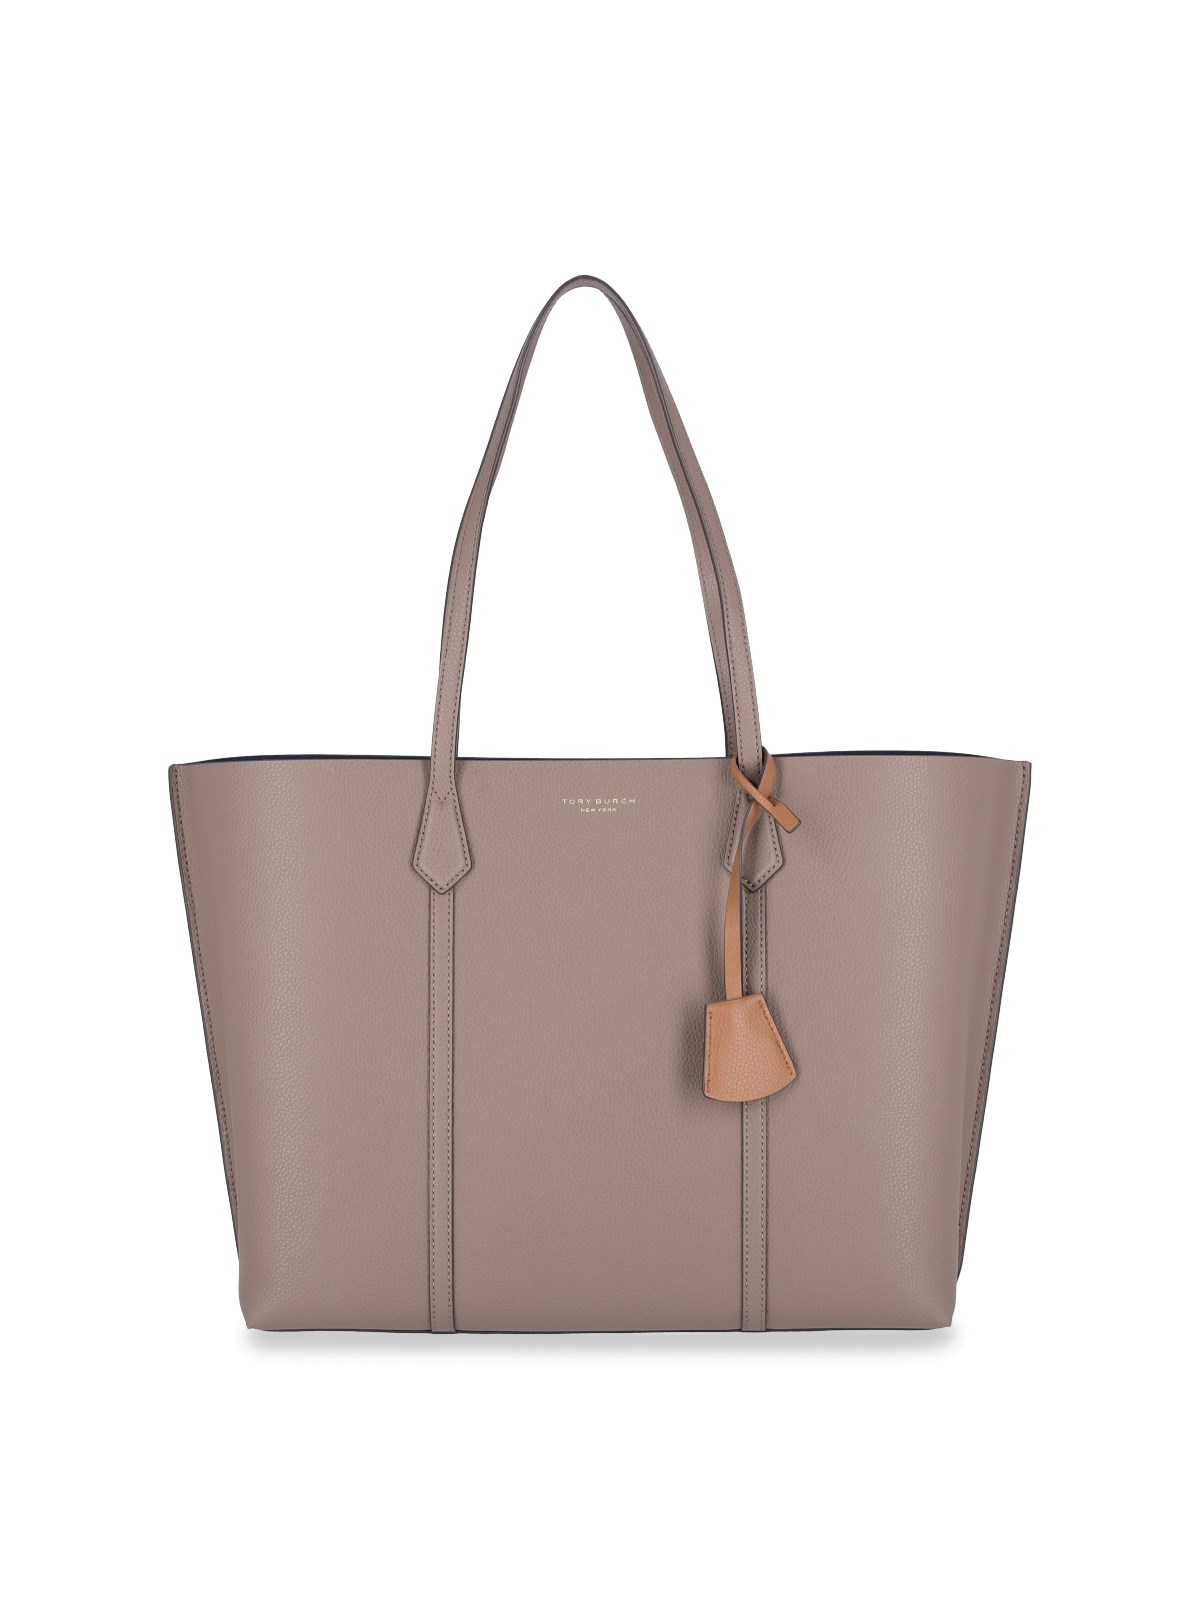 Shop Tory Burch "perry" Tote Bag In Taupe